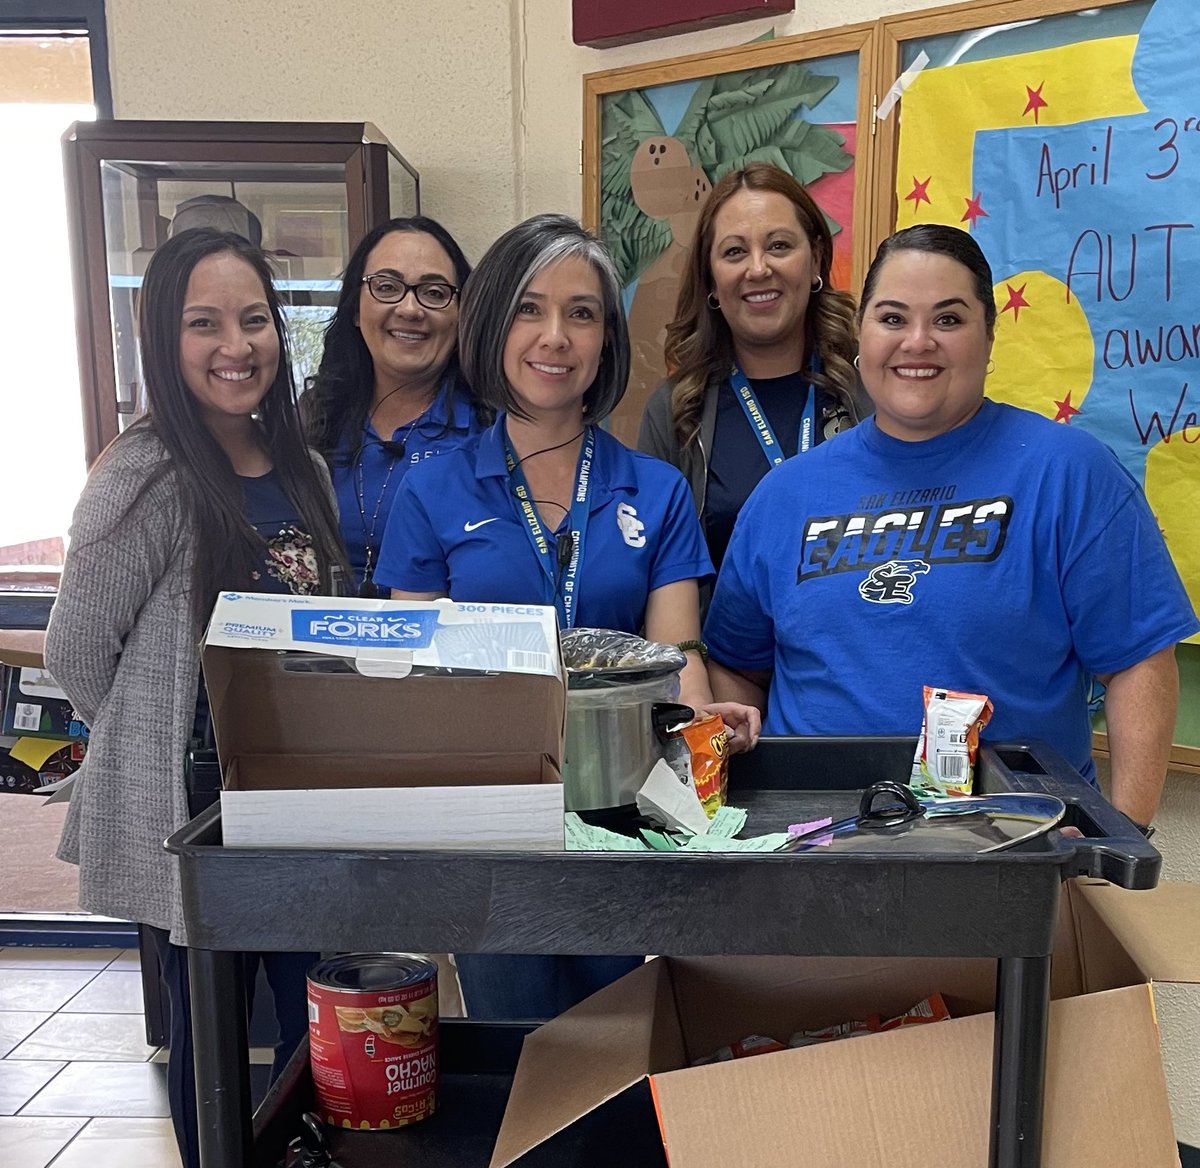 Shout-out to these amazing educators that served goodies for our @SEHS2023 after the egg hunt 😊@parentcenterSE @mesparza_SEHS @TeresitaParra3 @pvillarreal73 @bpallare #Grateful4U